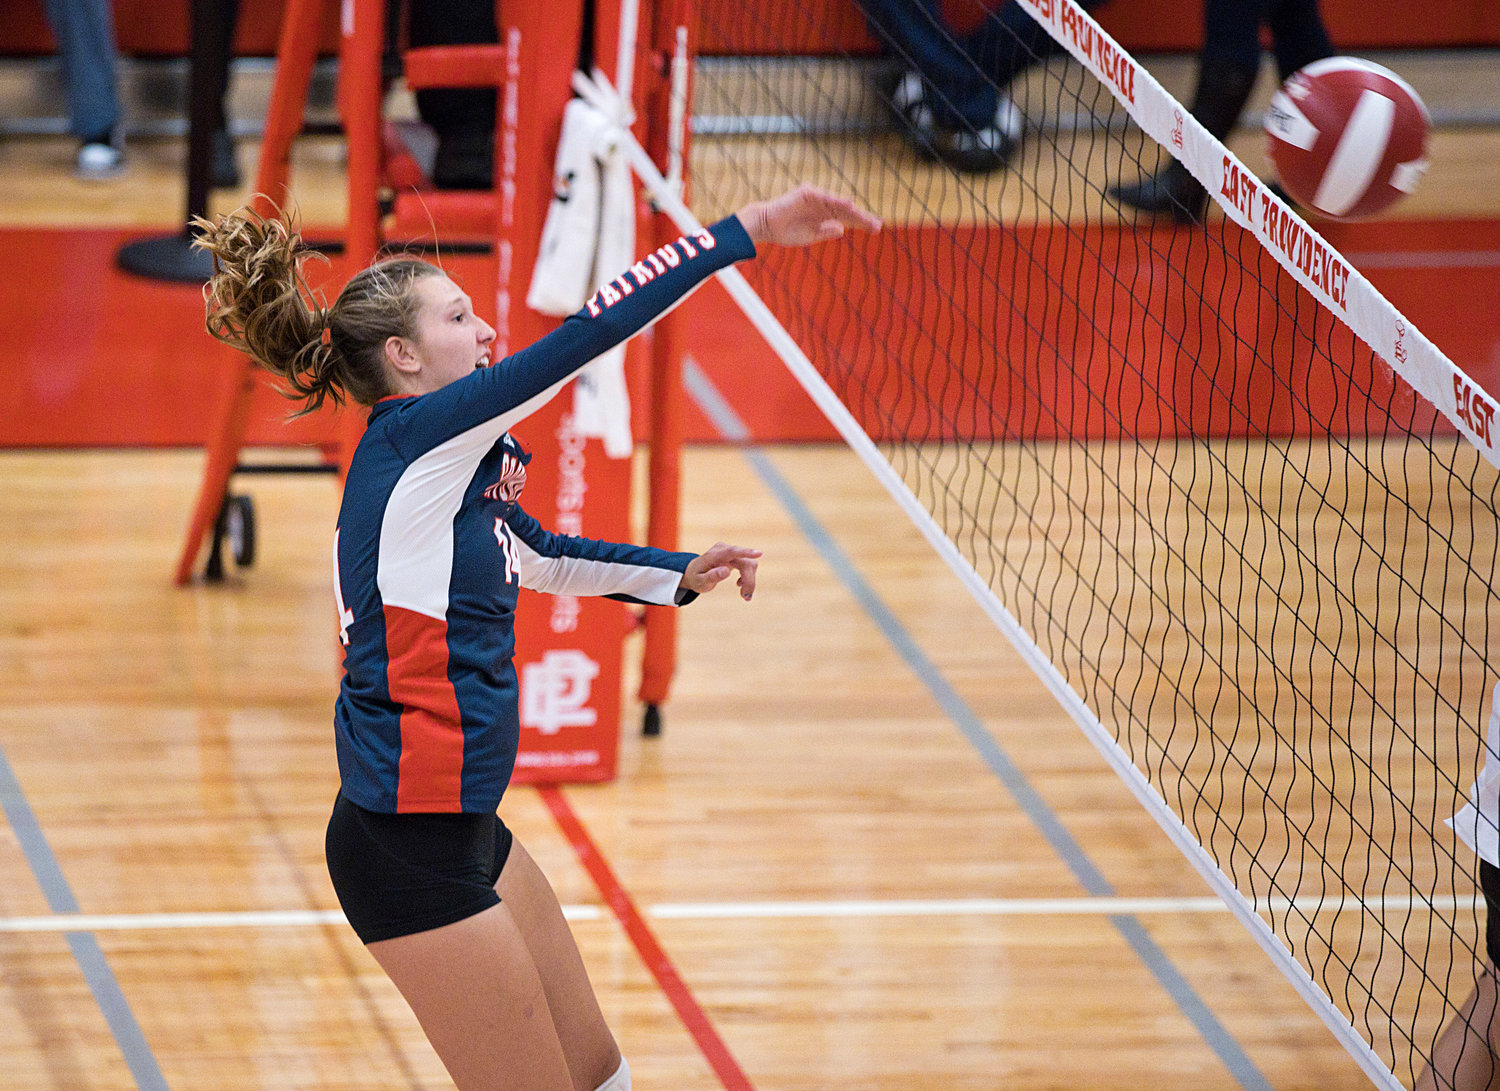 Morgan Casey fires a hard spike over the net while battling East Providence.